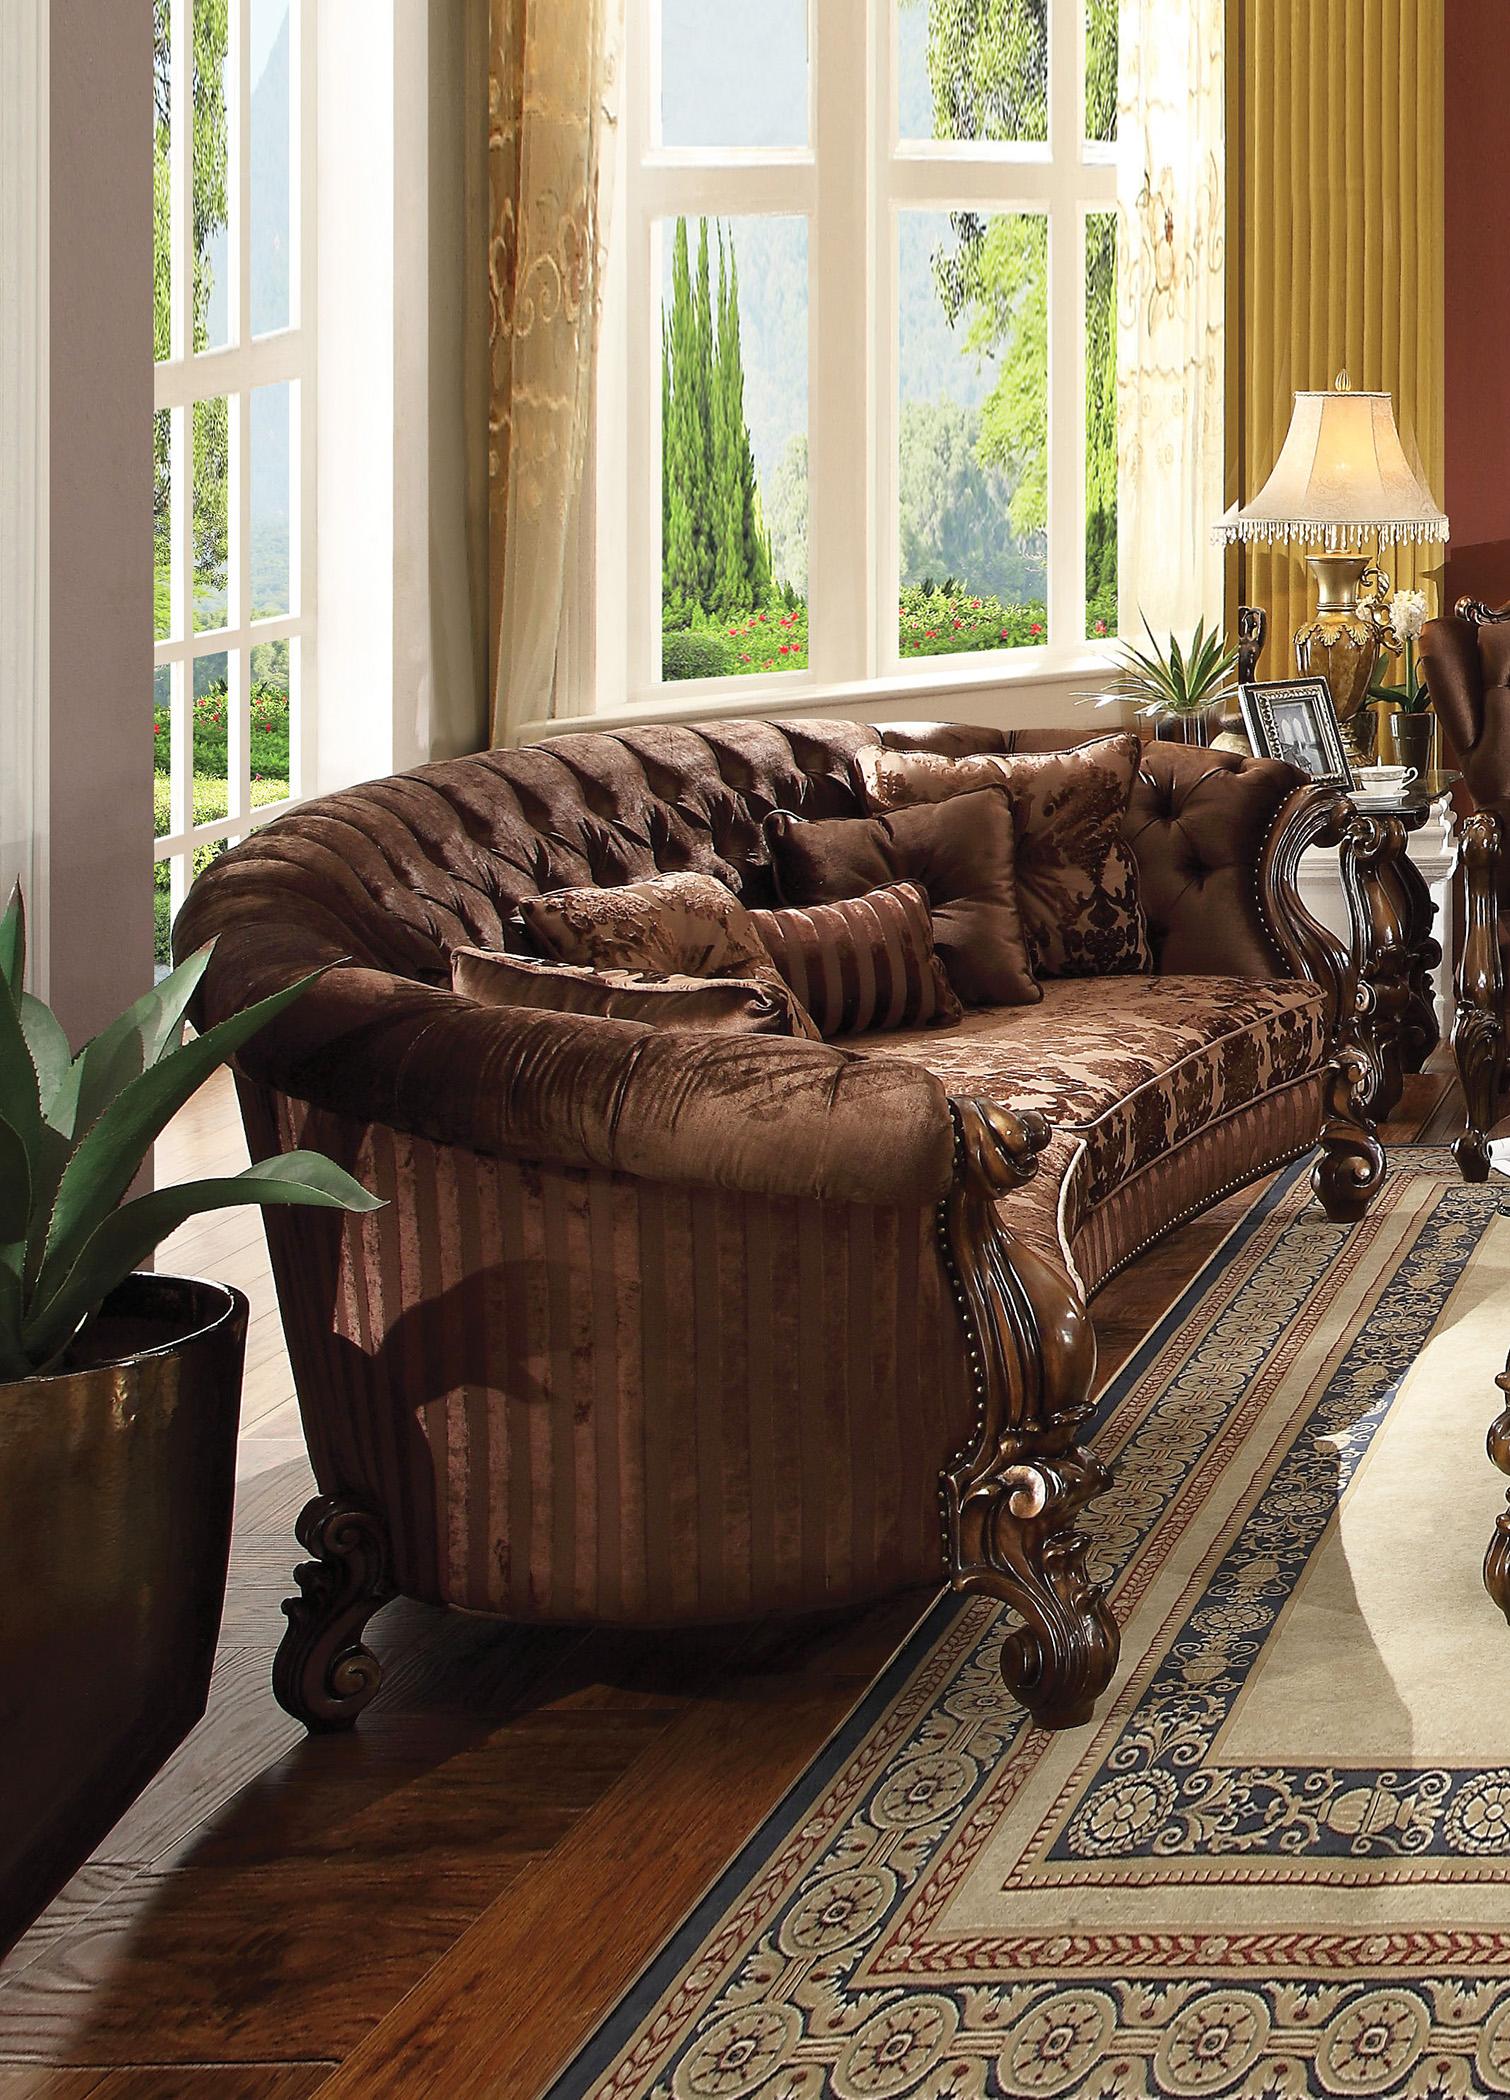 Classic, Traditional Oval Sofa Versailles-52080 Versailles-52080 in Oak, Cherry, Brown Soft Velvet